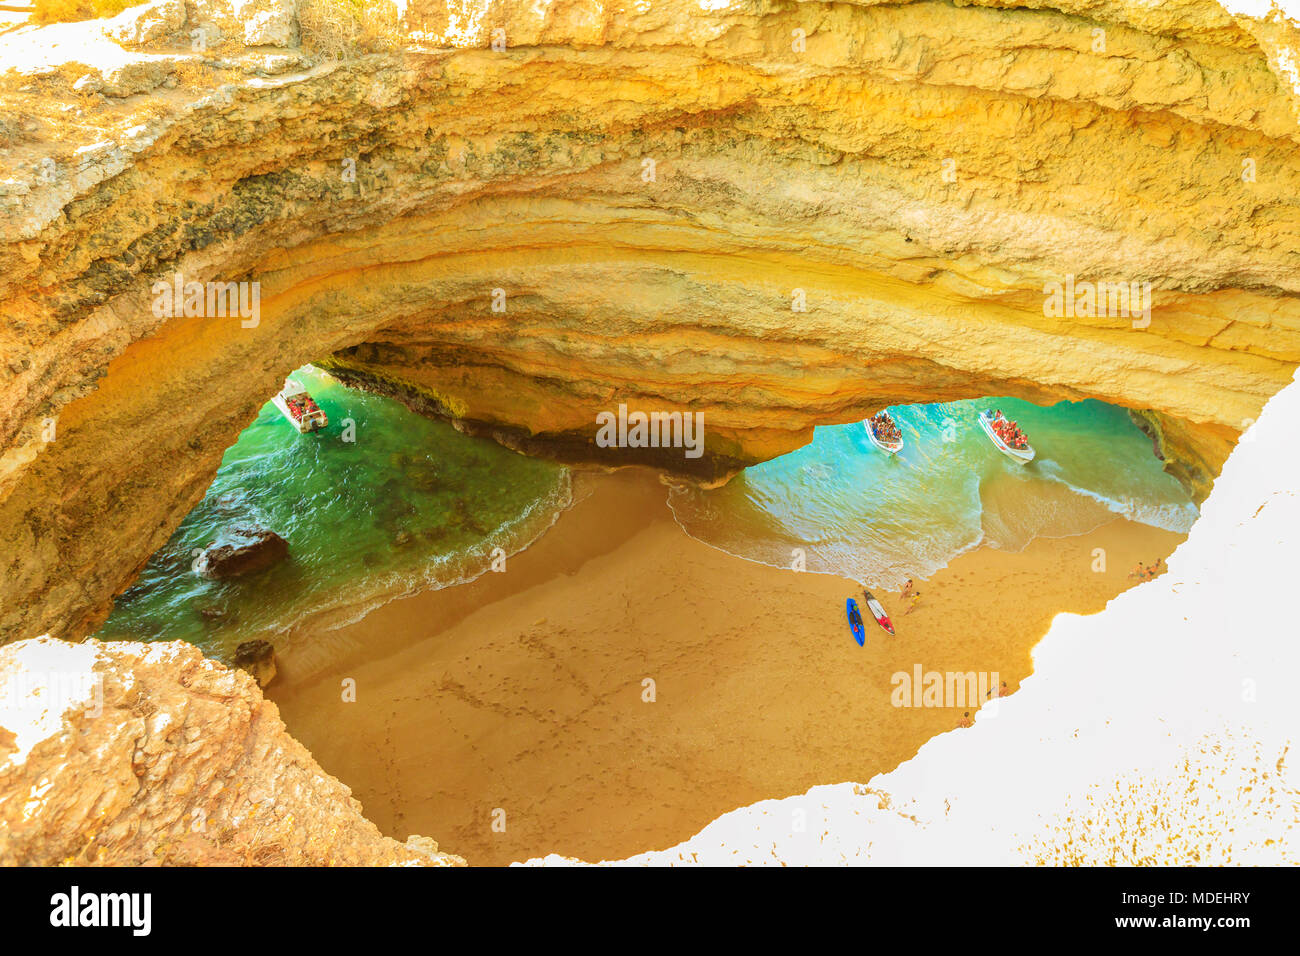 Algarve coast, Portugal. Aerial view of most impressive sea caves in Europe. Benagil Cave with boat trips leading to visit the caves from Praia de Benagil. Algar de Benagil is only accessible by sea. Stock Photo